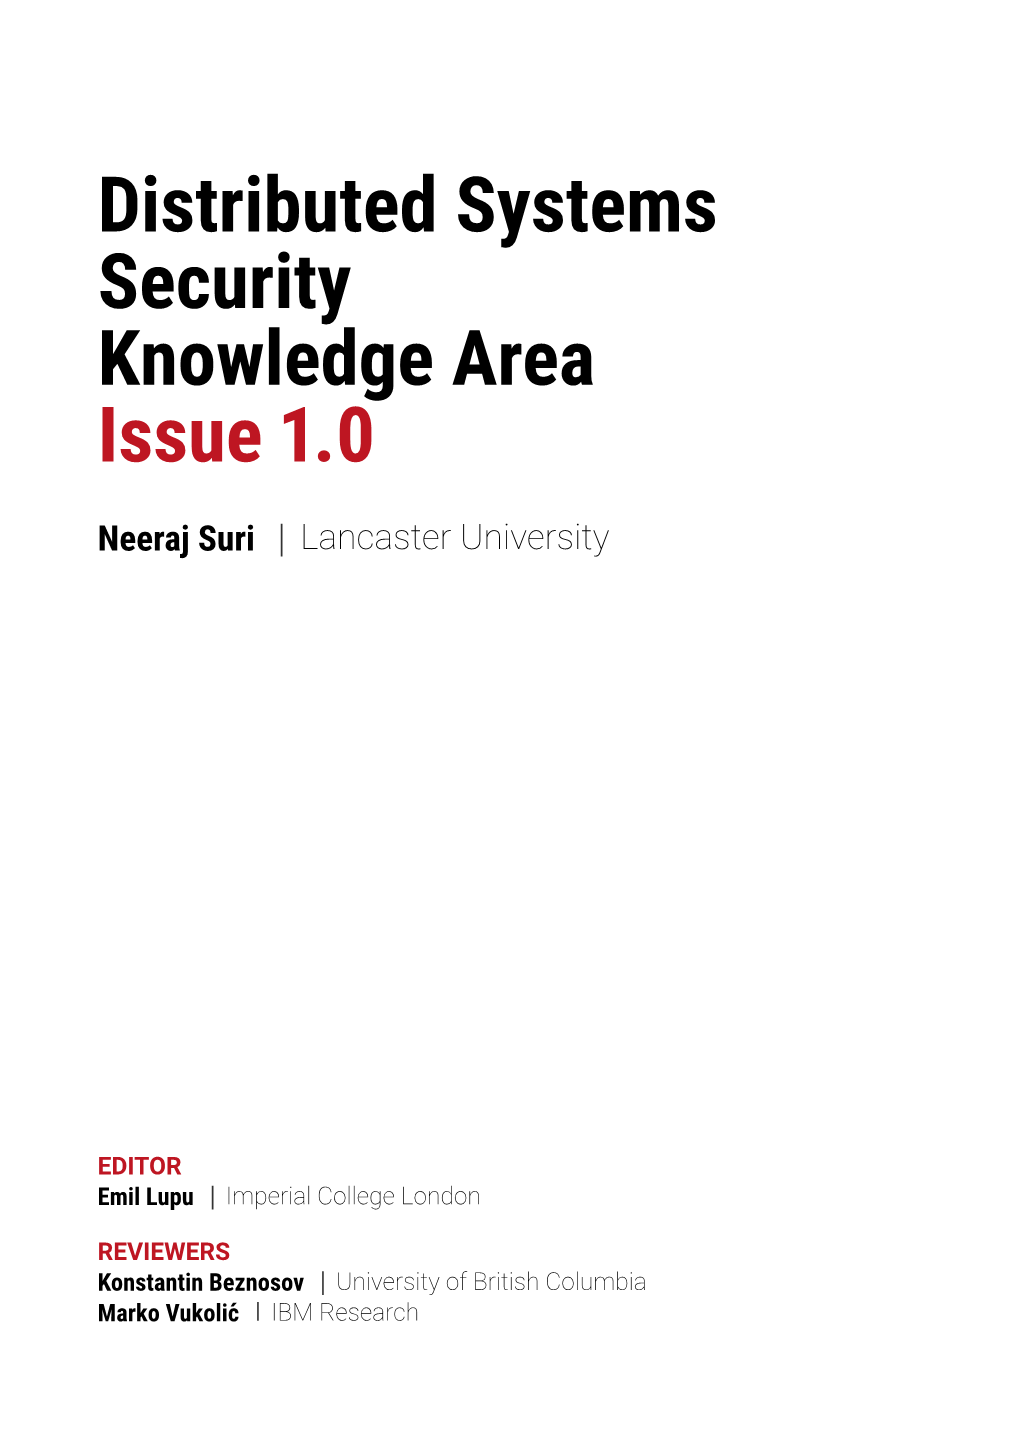 Distributed Systems Security Knowledge Area Issue 1.0